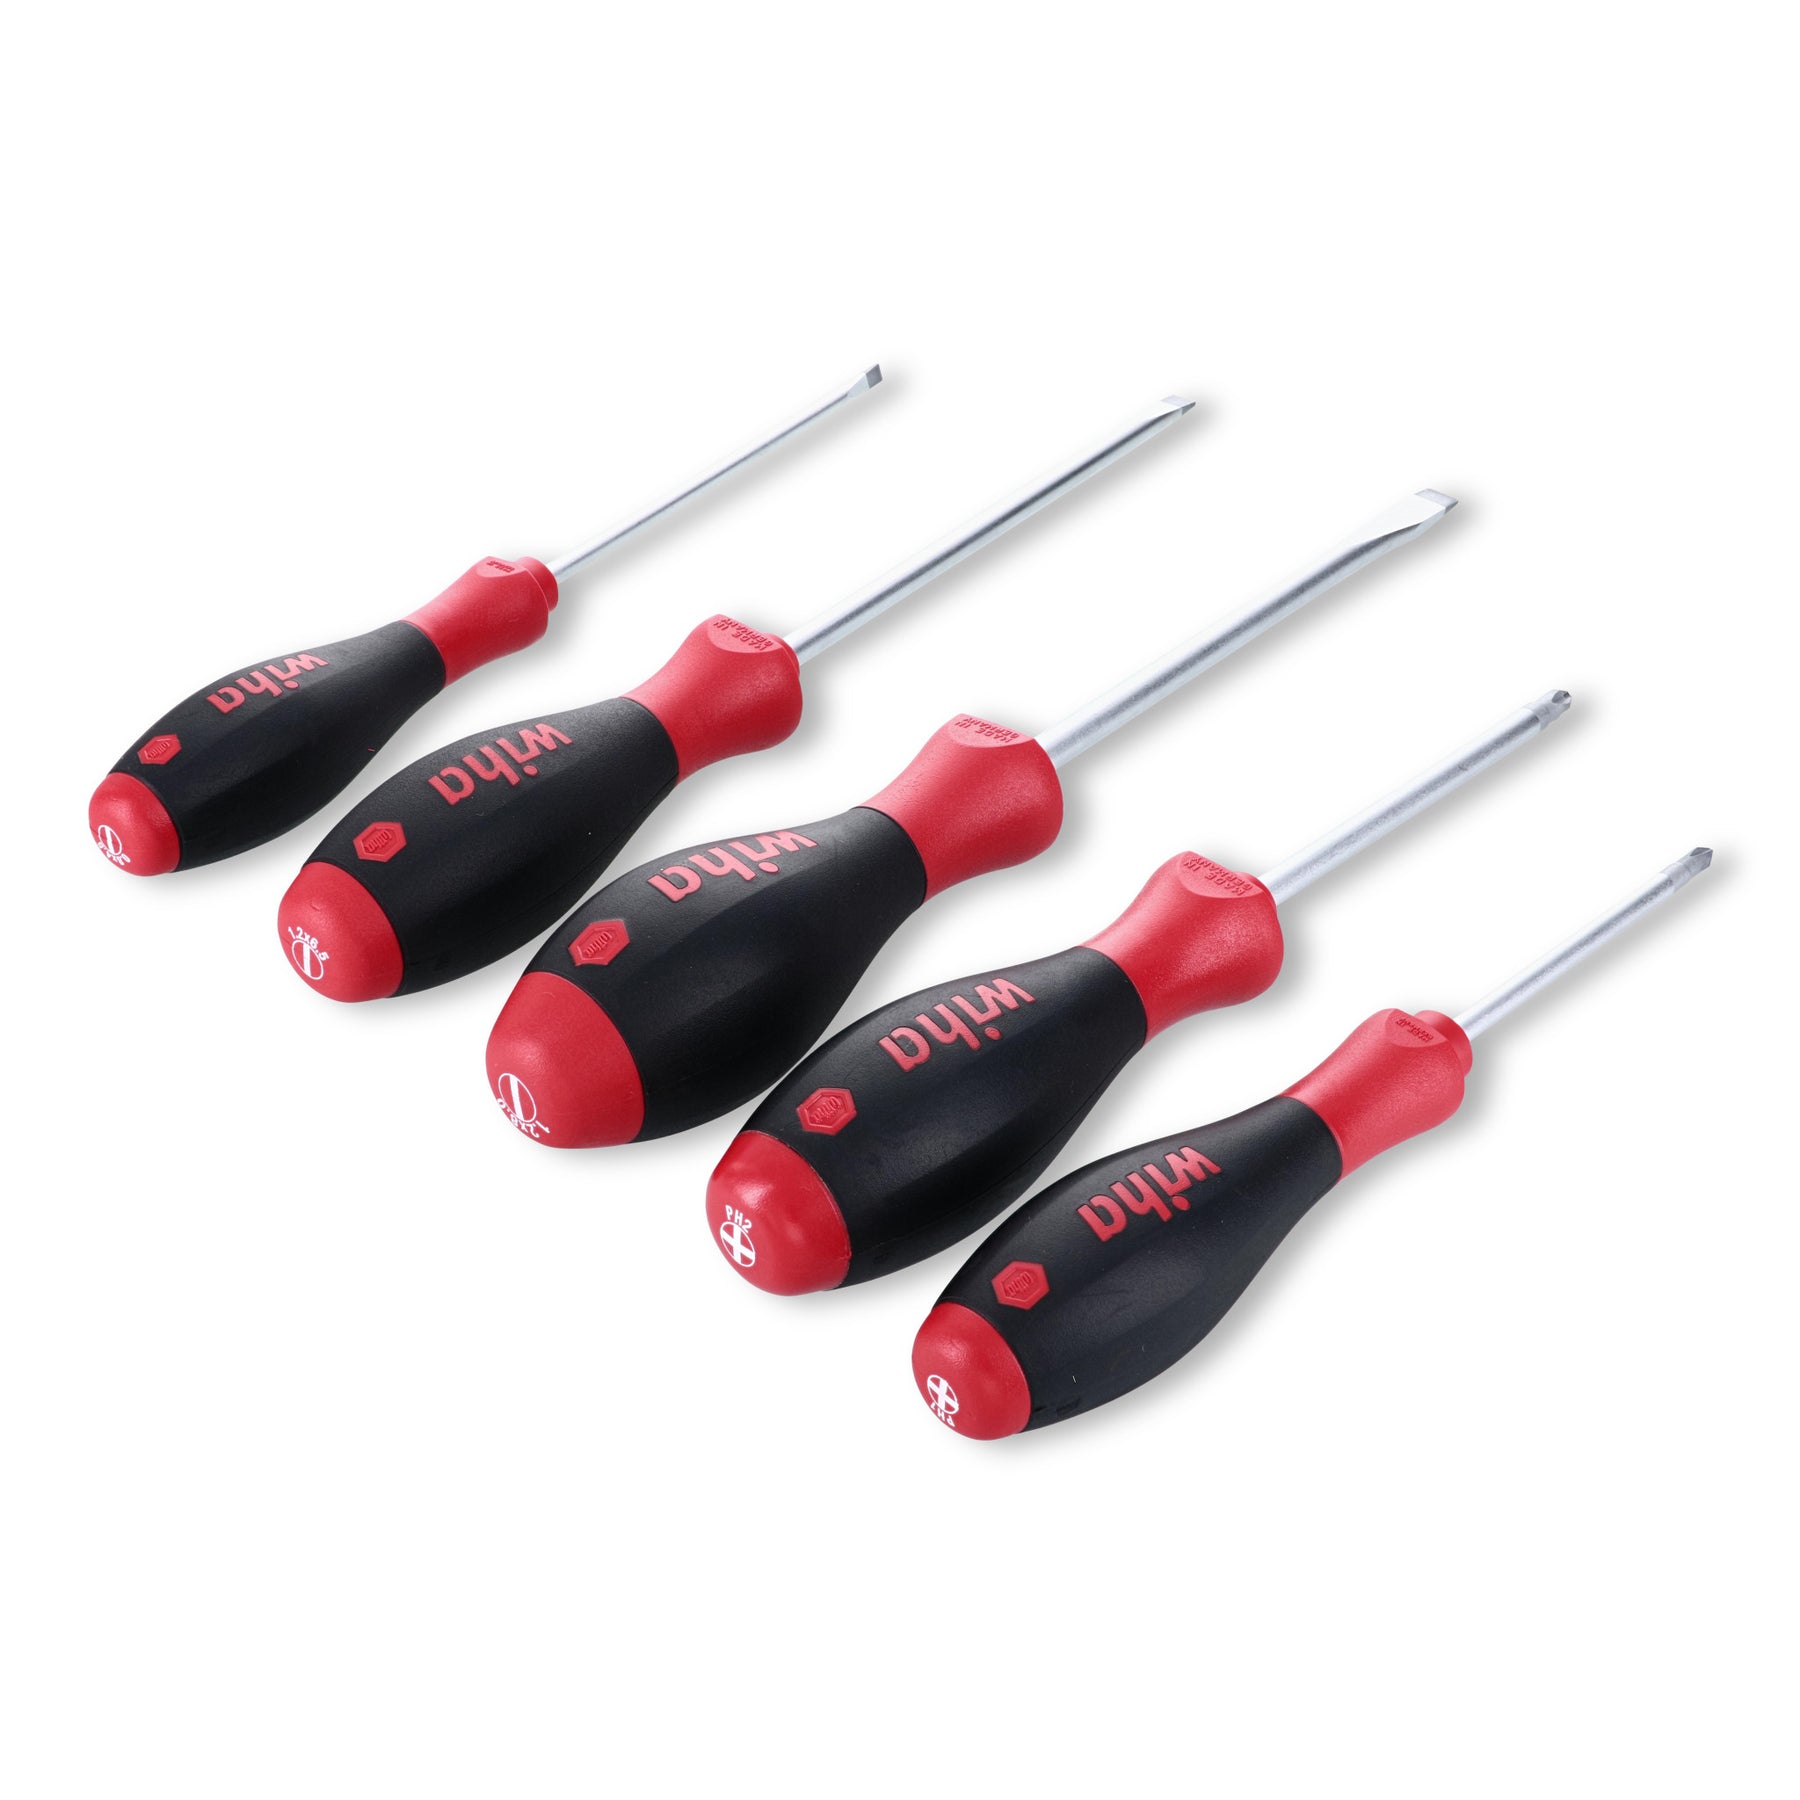 5 Piece SoftFinish Slotted and Phillips Screwdriver Set